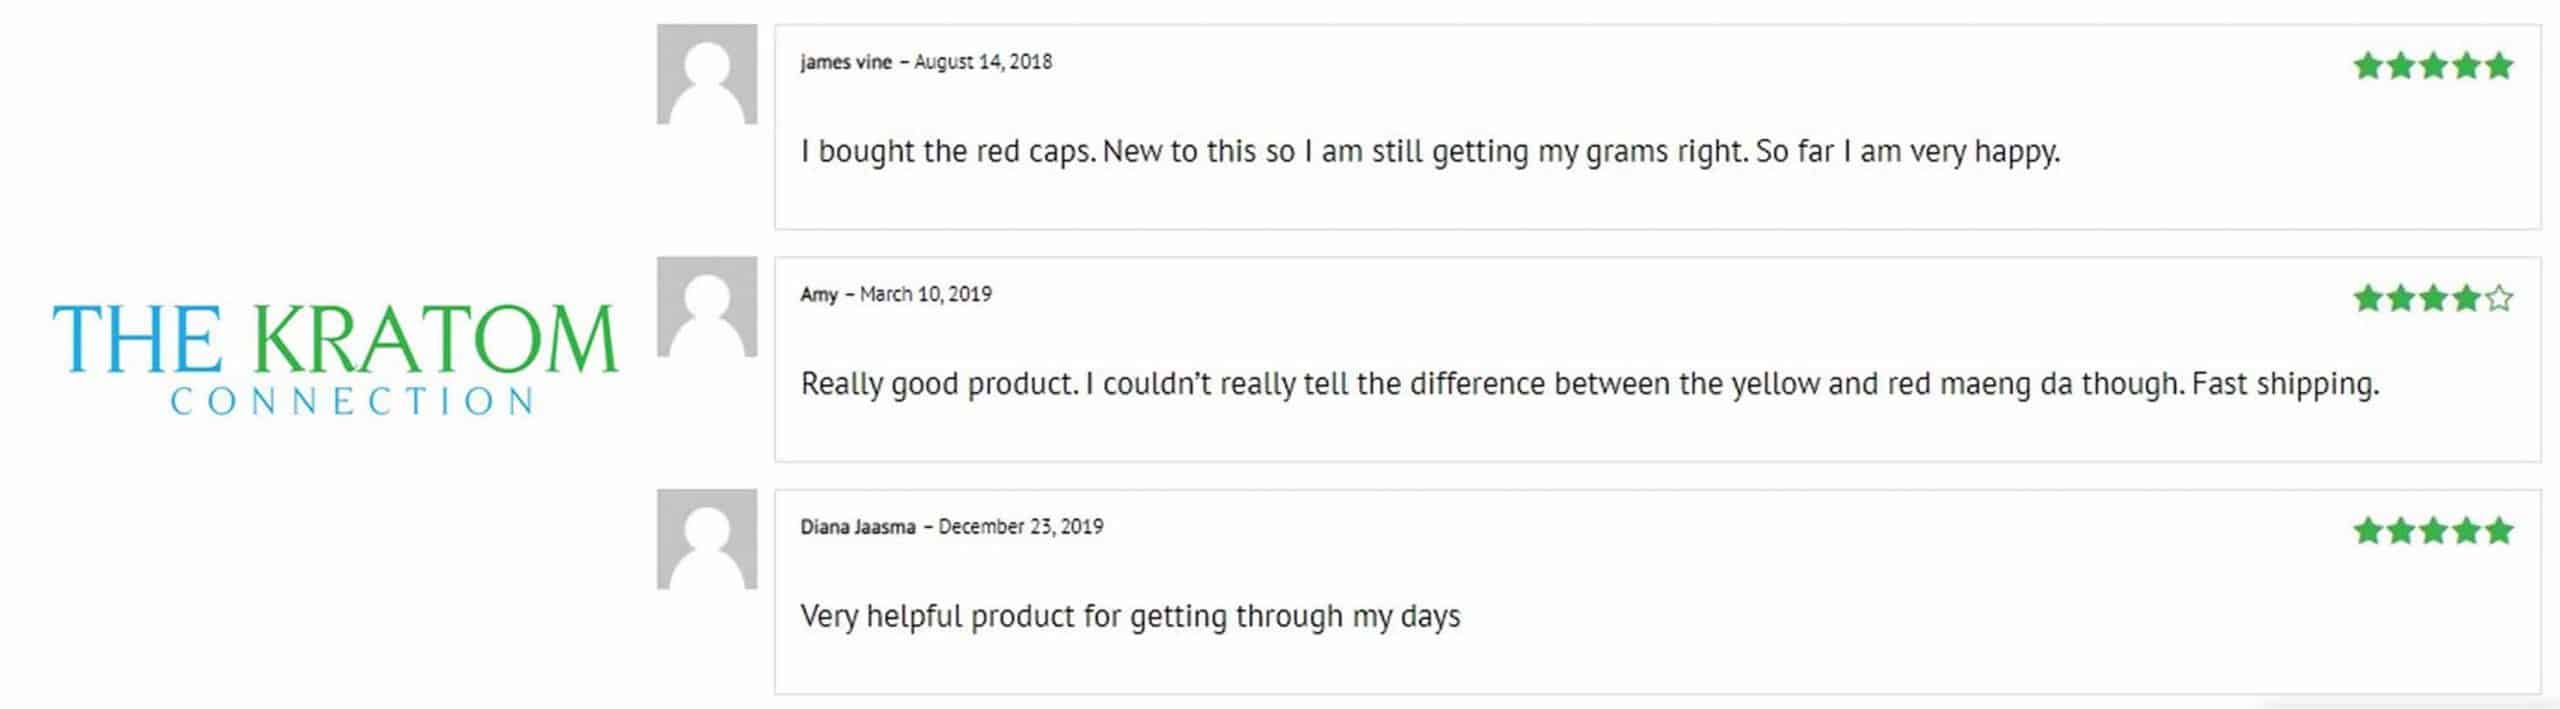 image of the kratom connection customer reviews